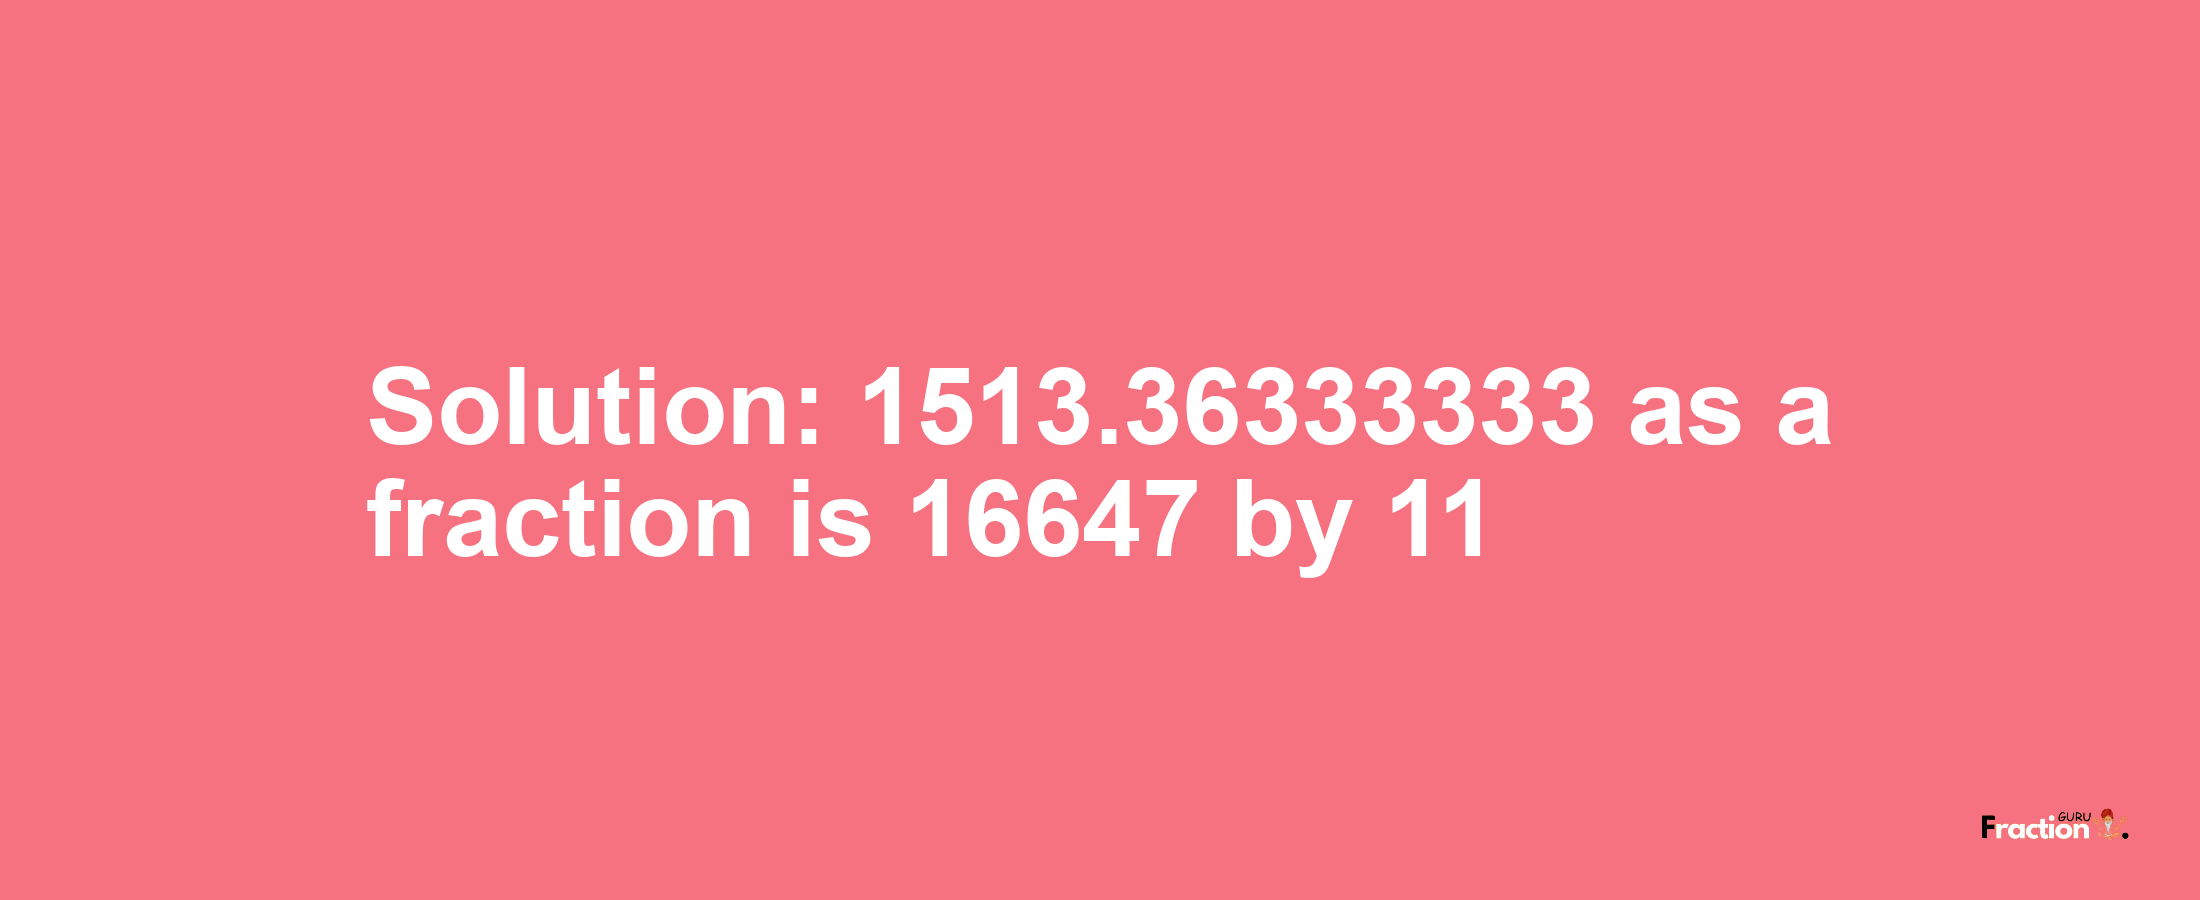 Solution:1513.36333333 as a fraction is 16647/11